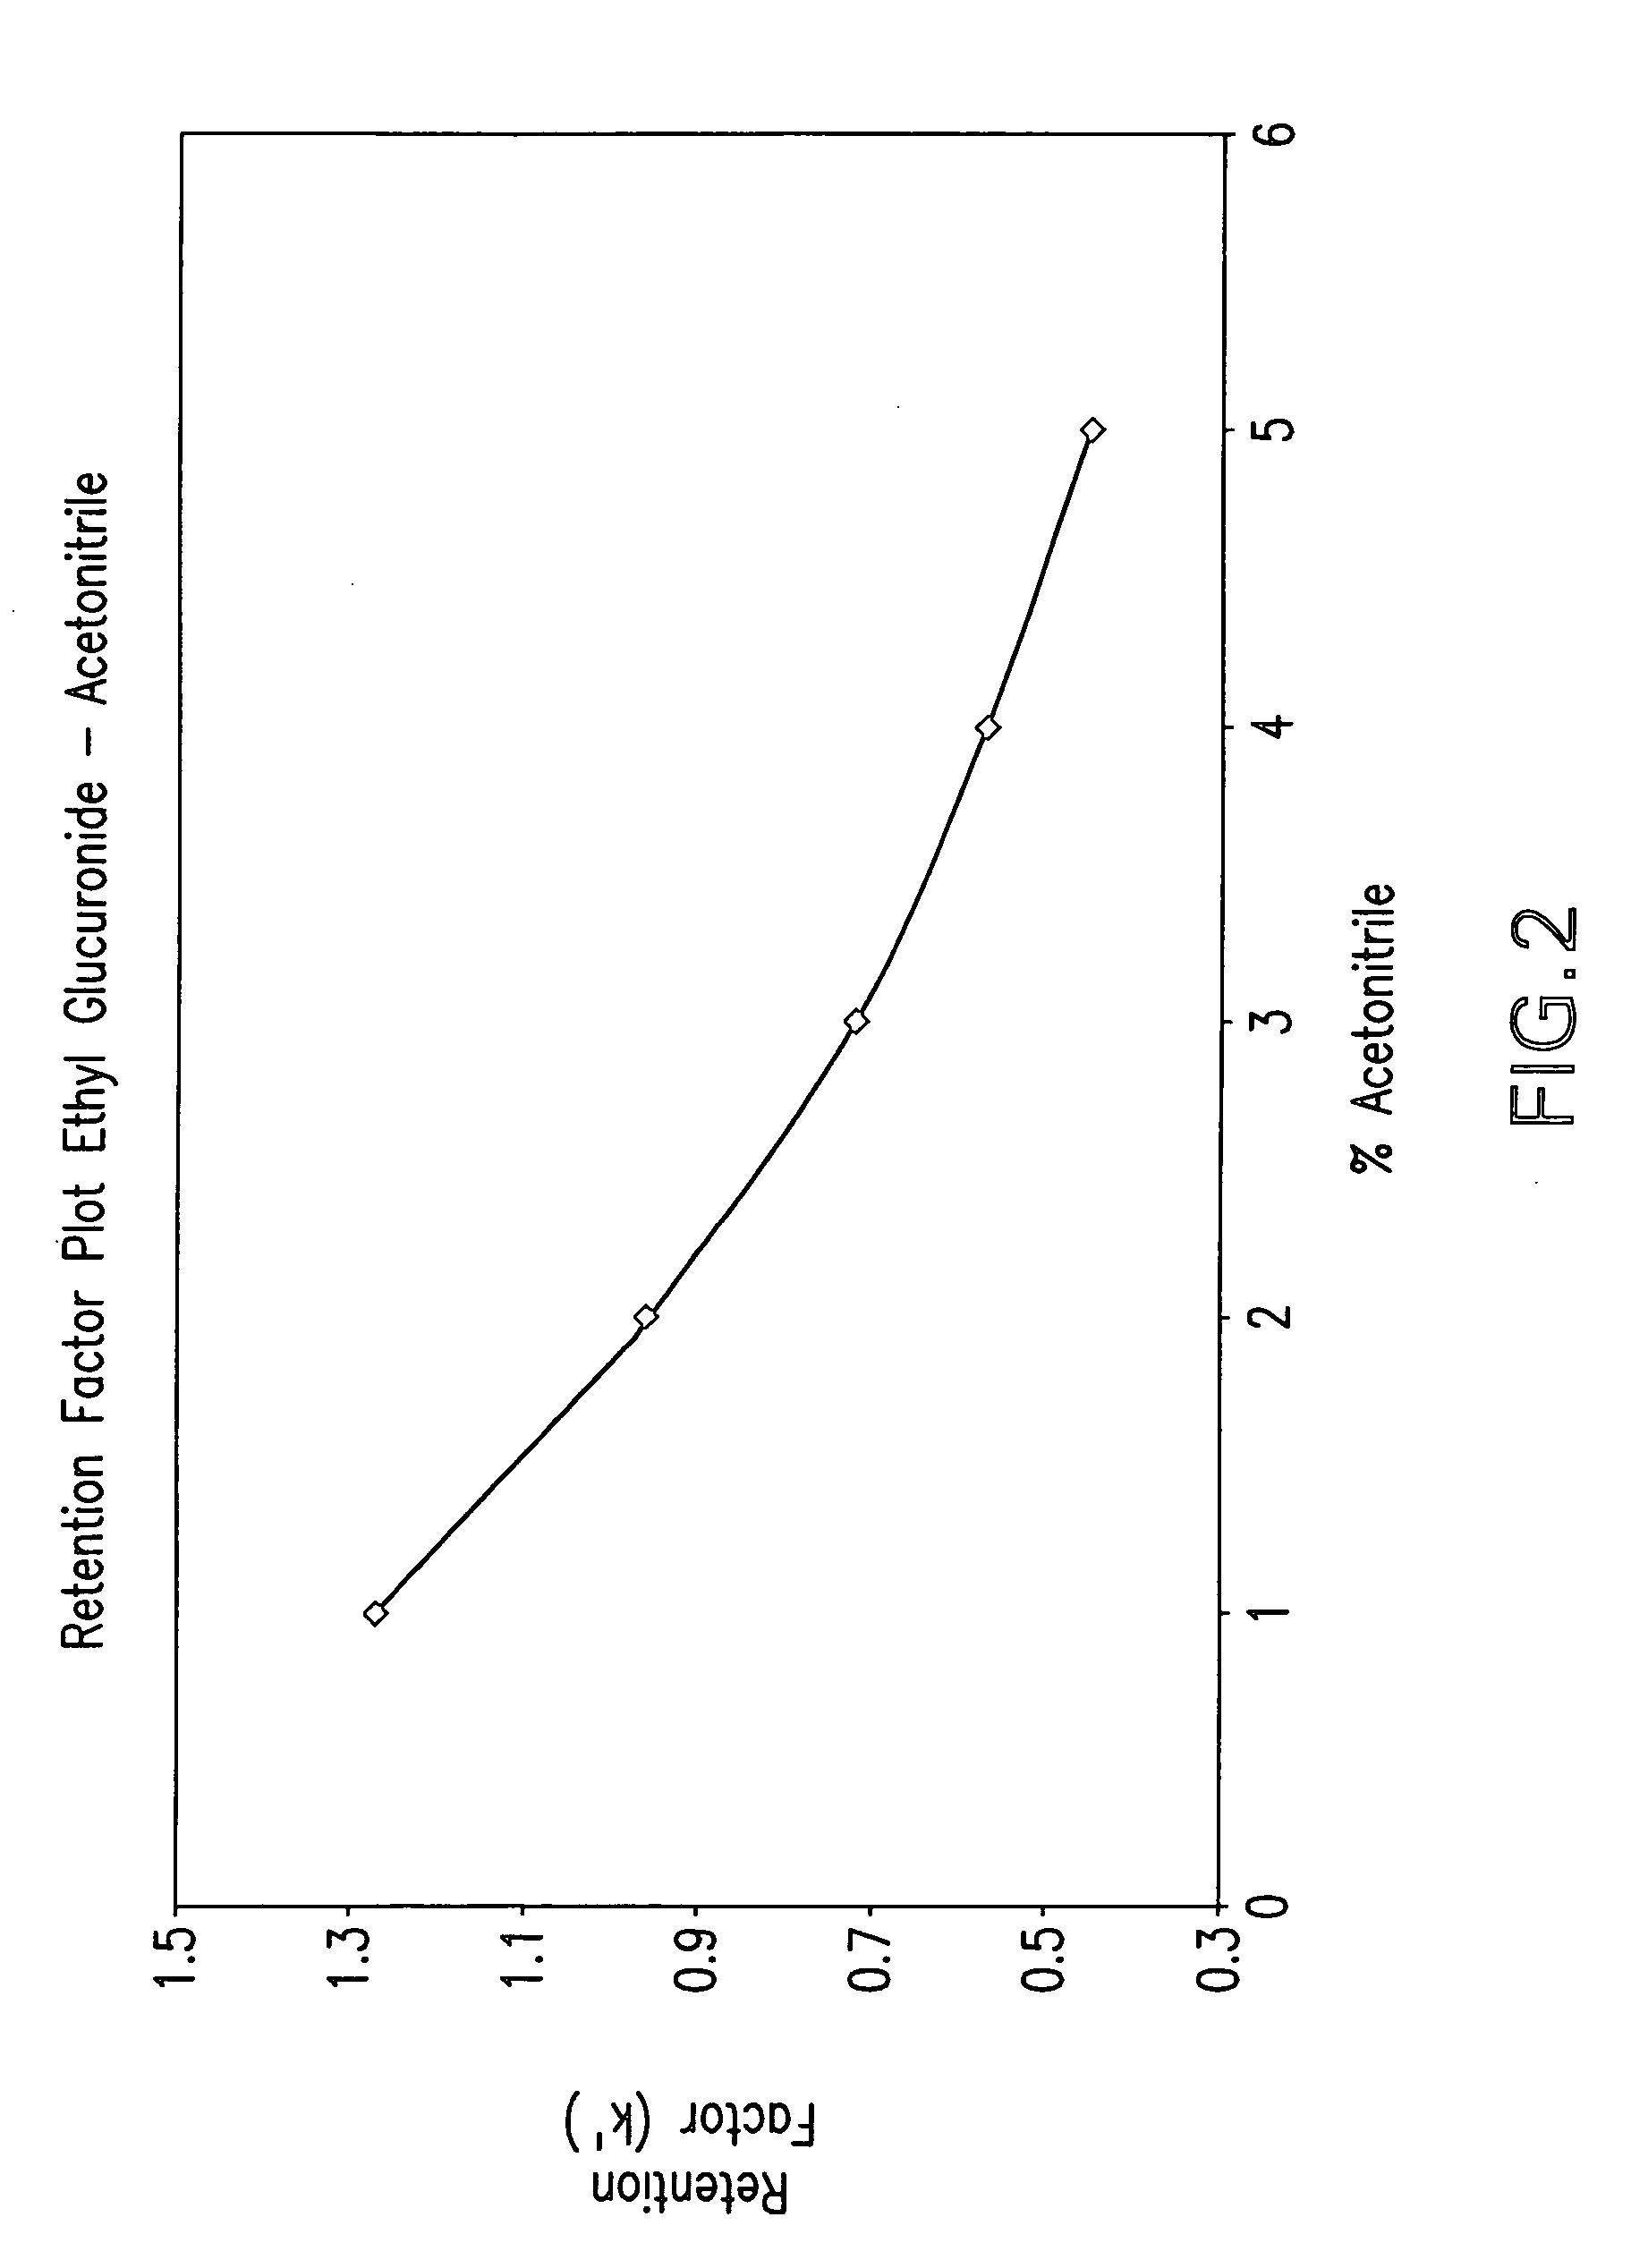 Method for the determination of glucuronides in physiological samples